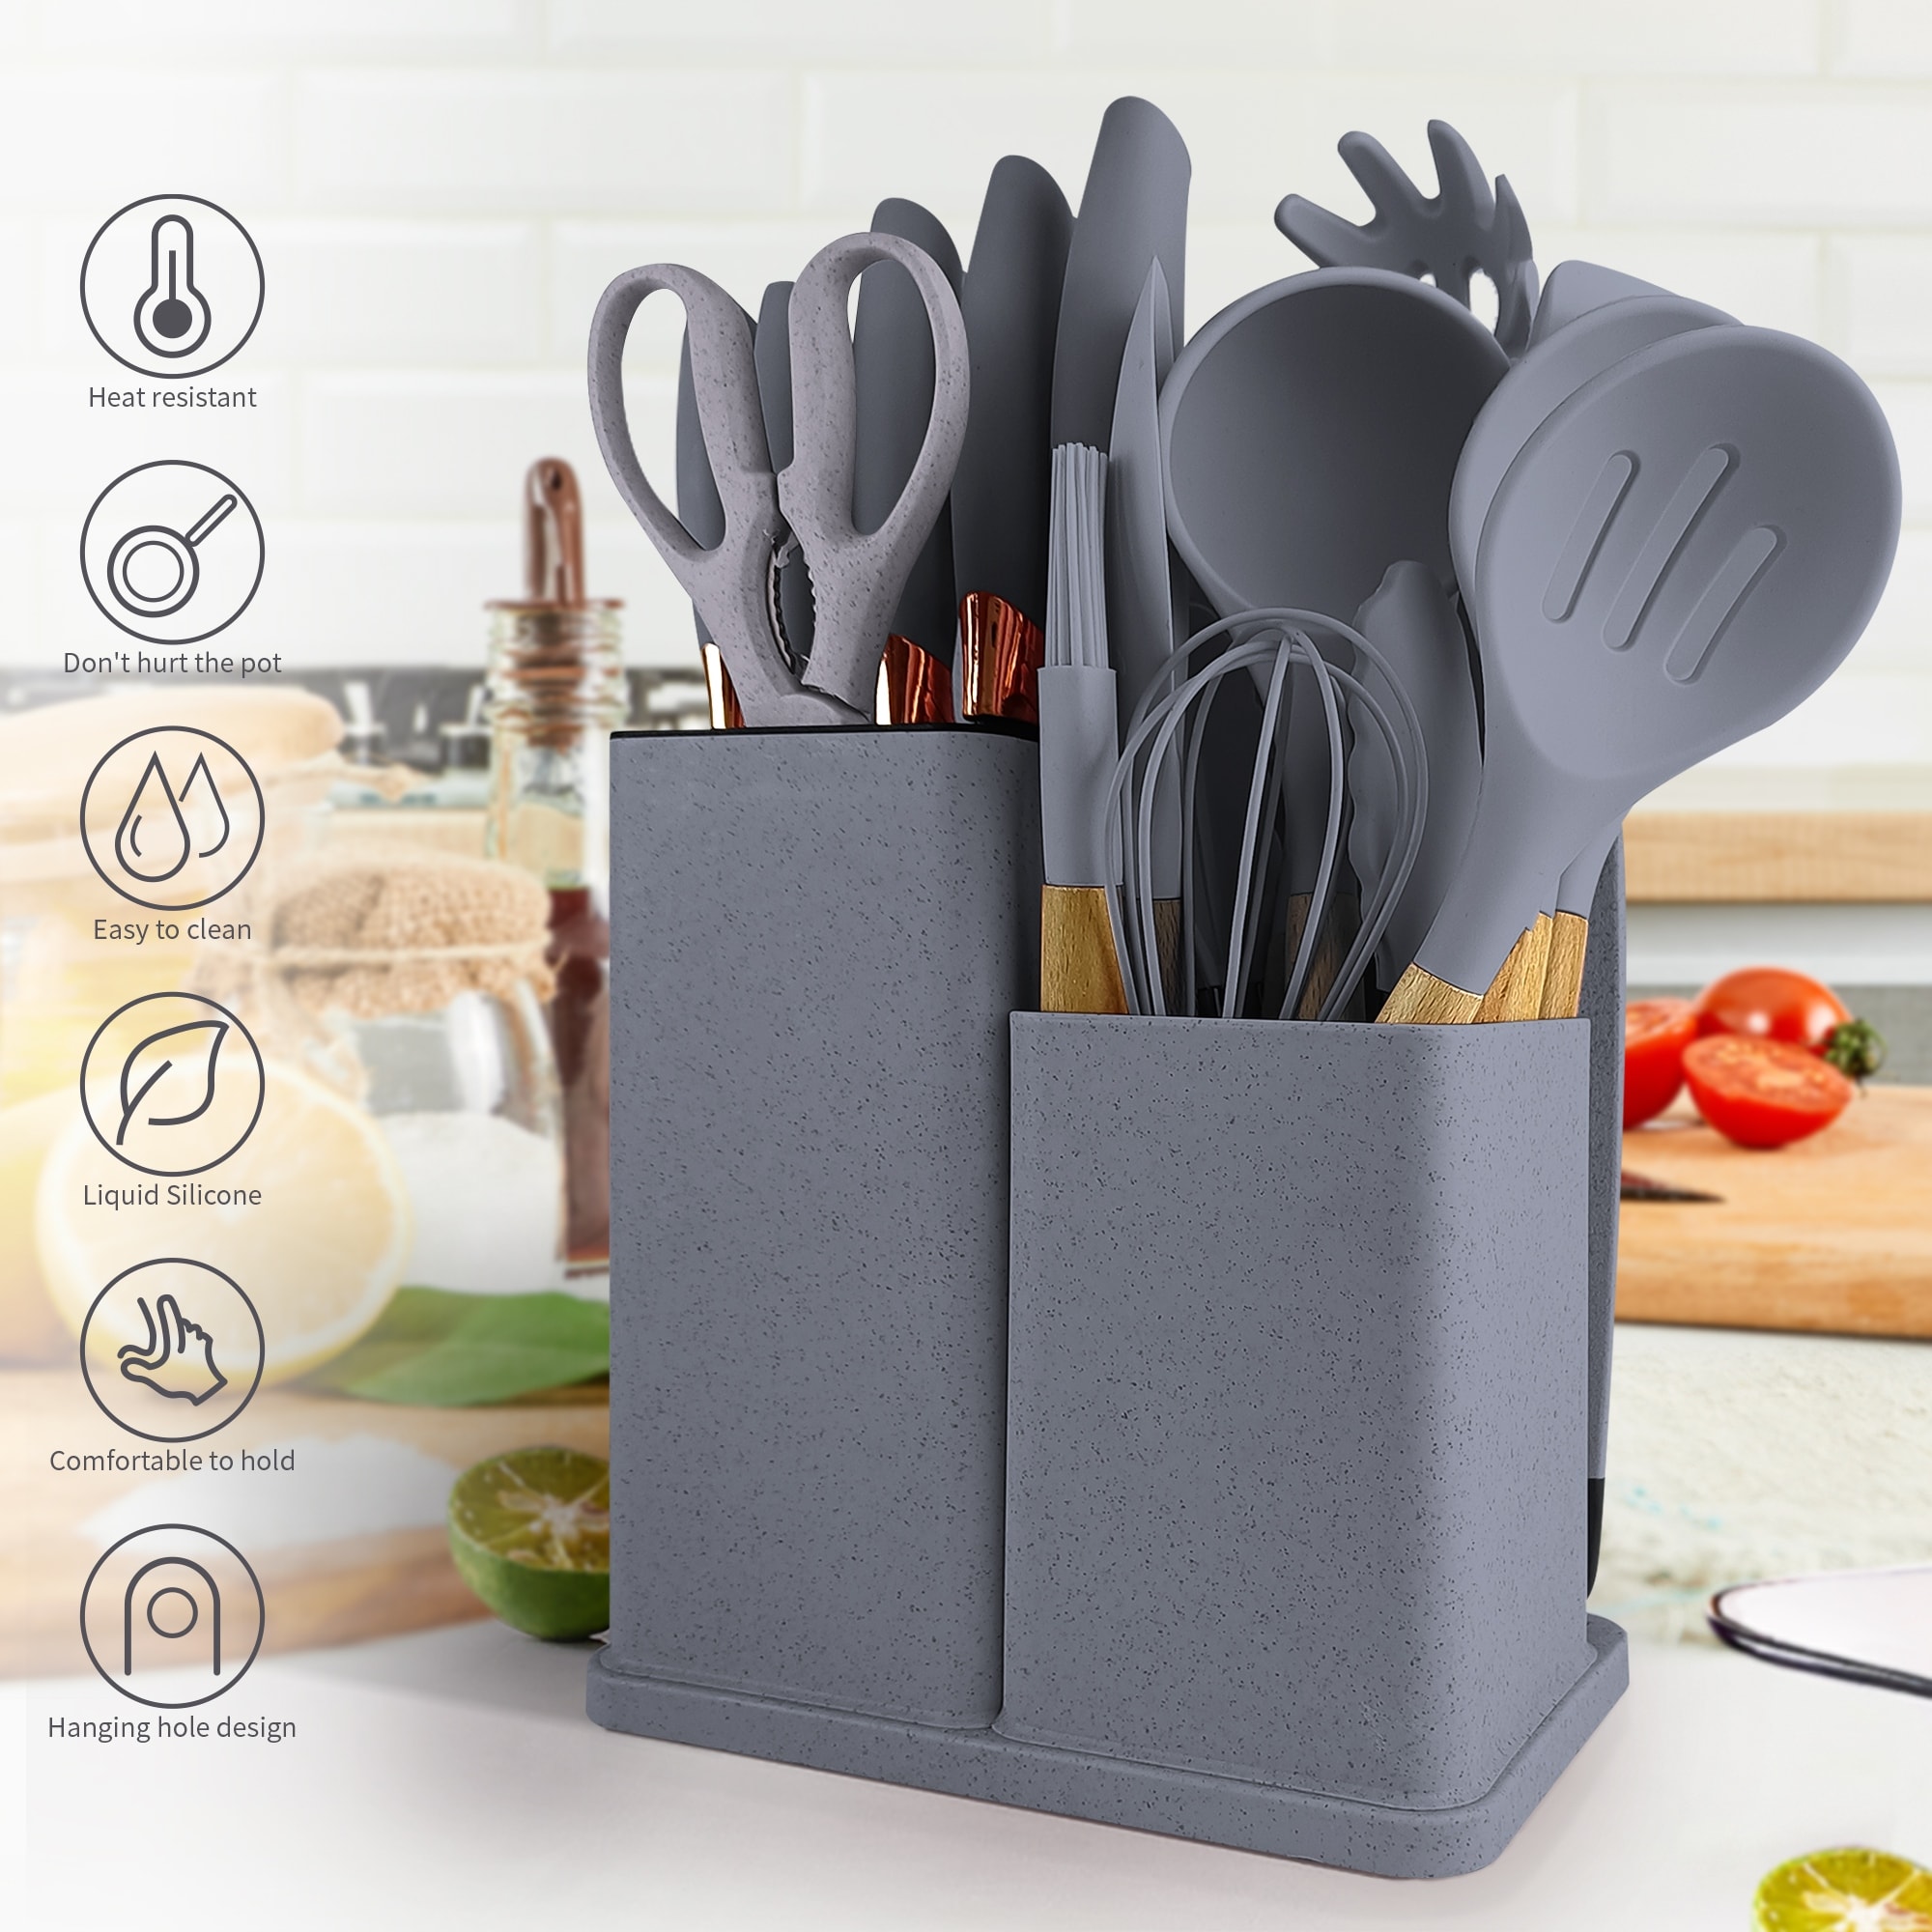 NCUE Kitchen Utensils Set, 35 Pcs Silicone Cooking Utensils Set with  Holder, with Stainless Steel Ha…See more NCUE Kitchen Utensils Set, 35 Pcs